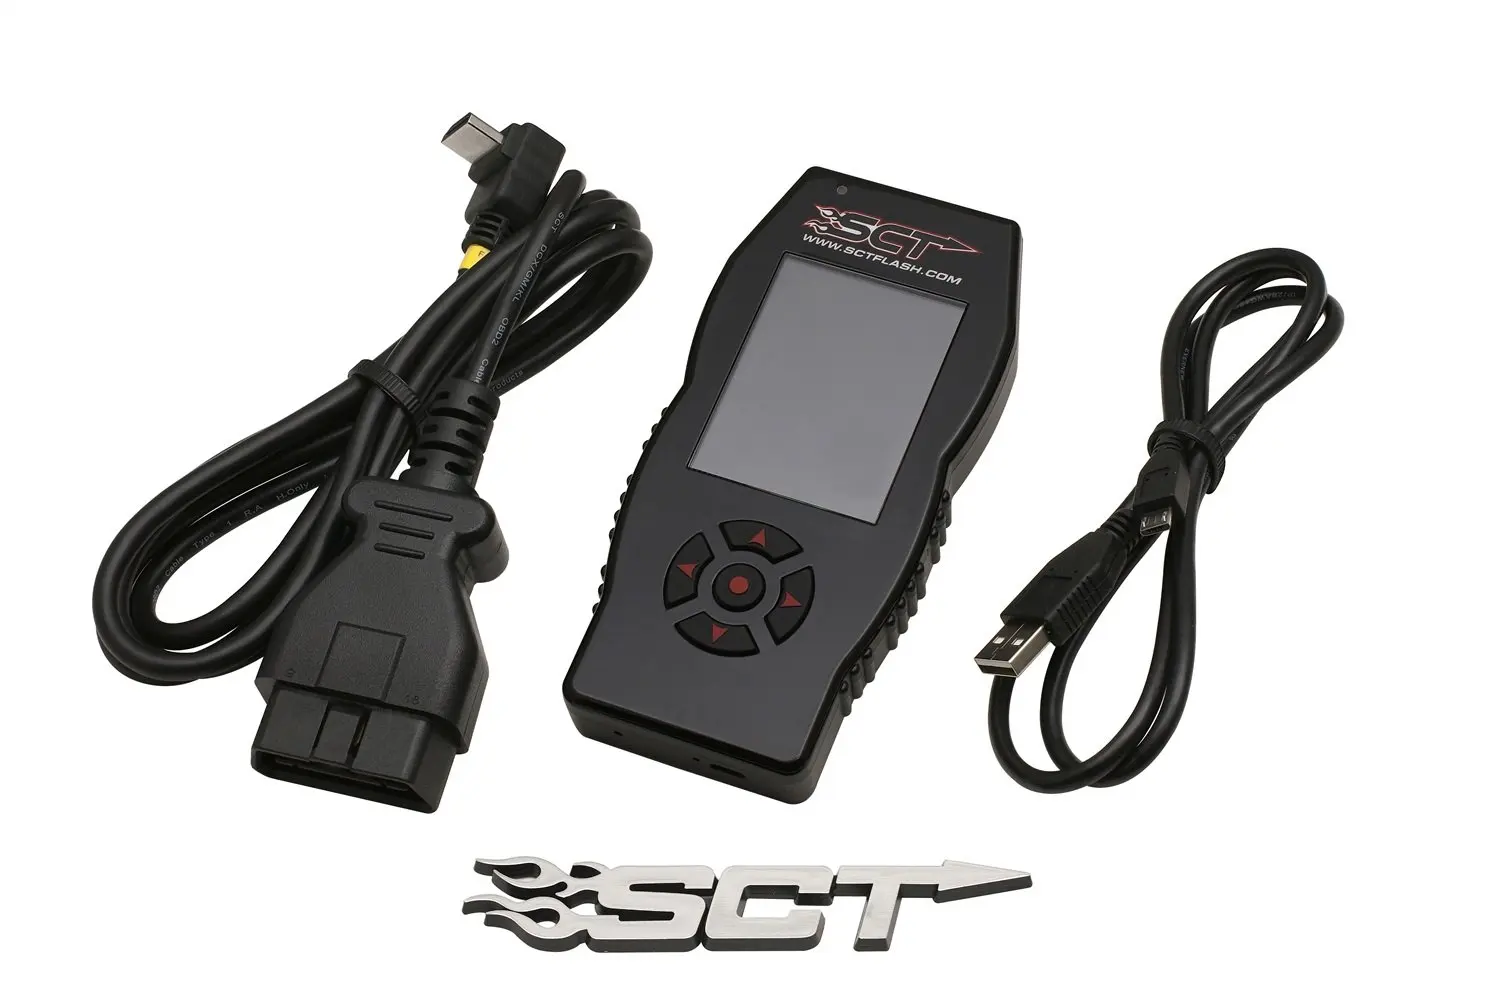 SCT 7006 Windshield Suction Mount for X4 Flash Programmer Fast & Free Shipping